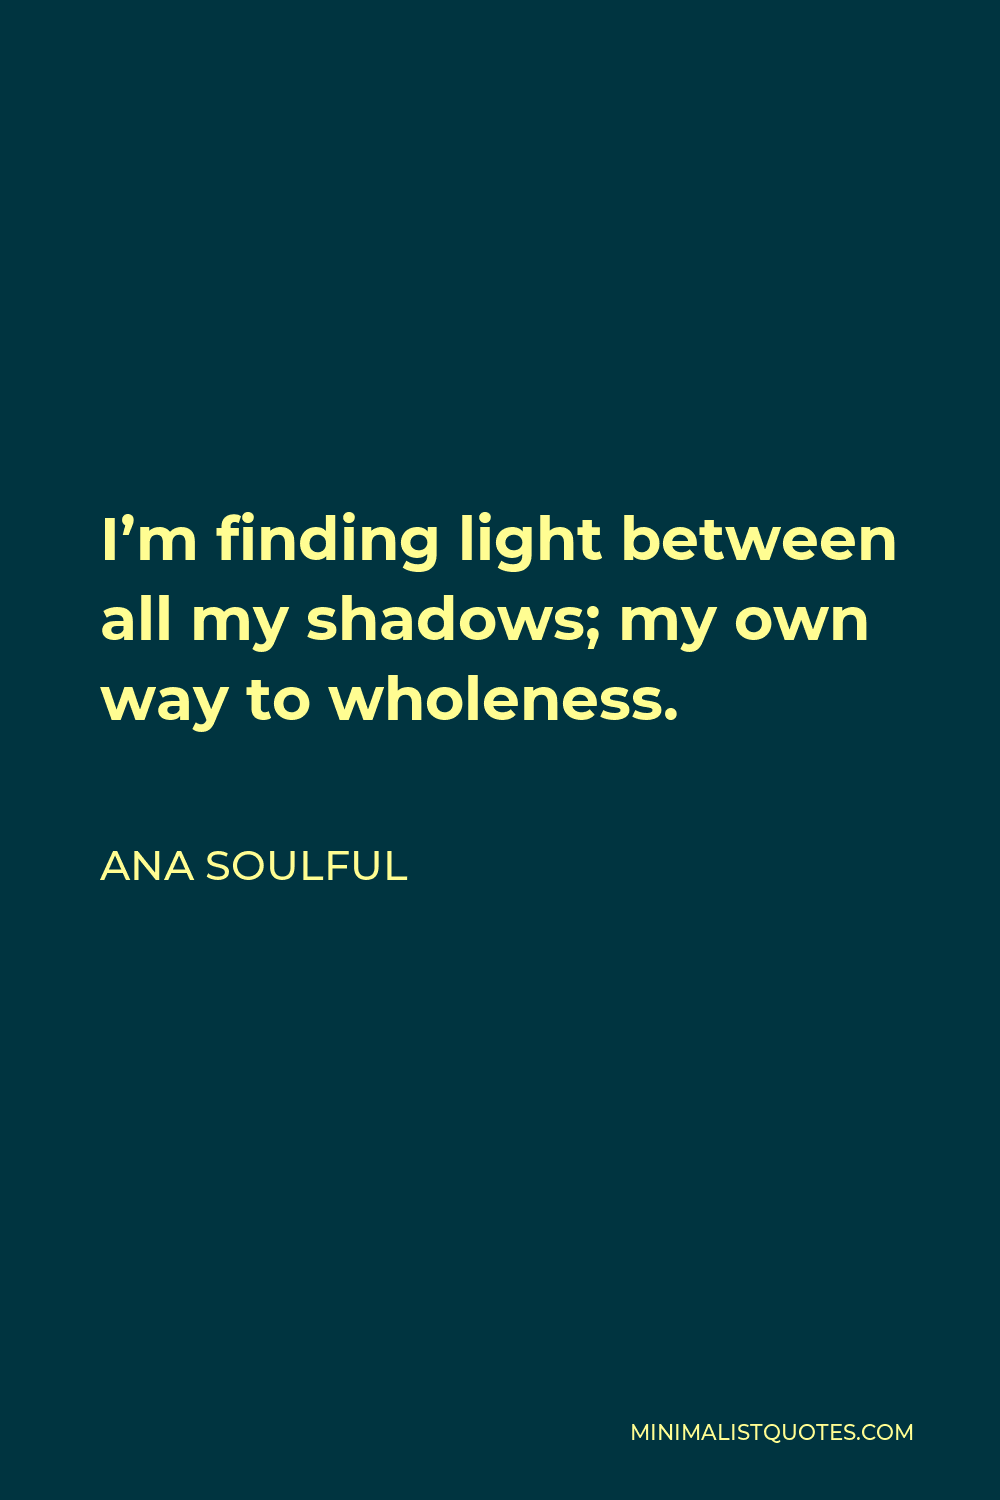 Ana Soulful Quote - I’m finding light between all my shadows; my own way to wholeness.